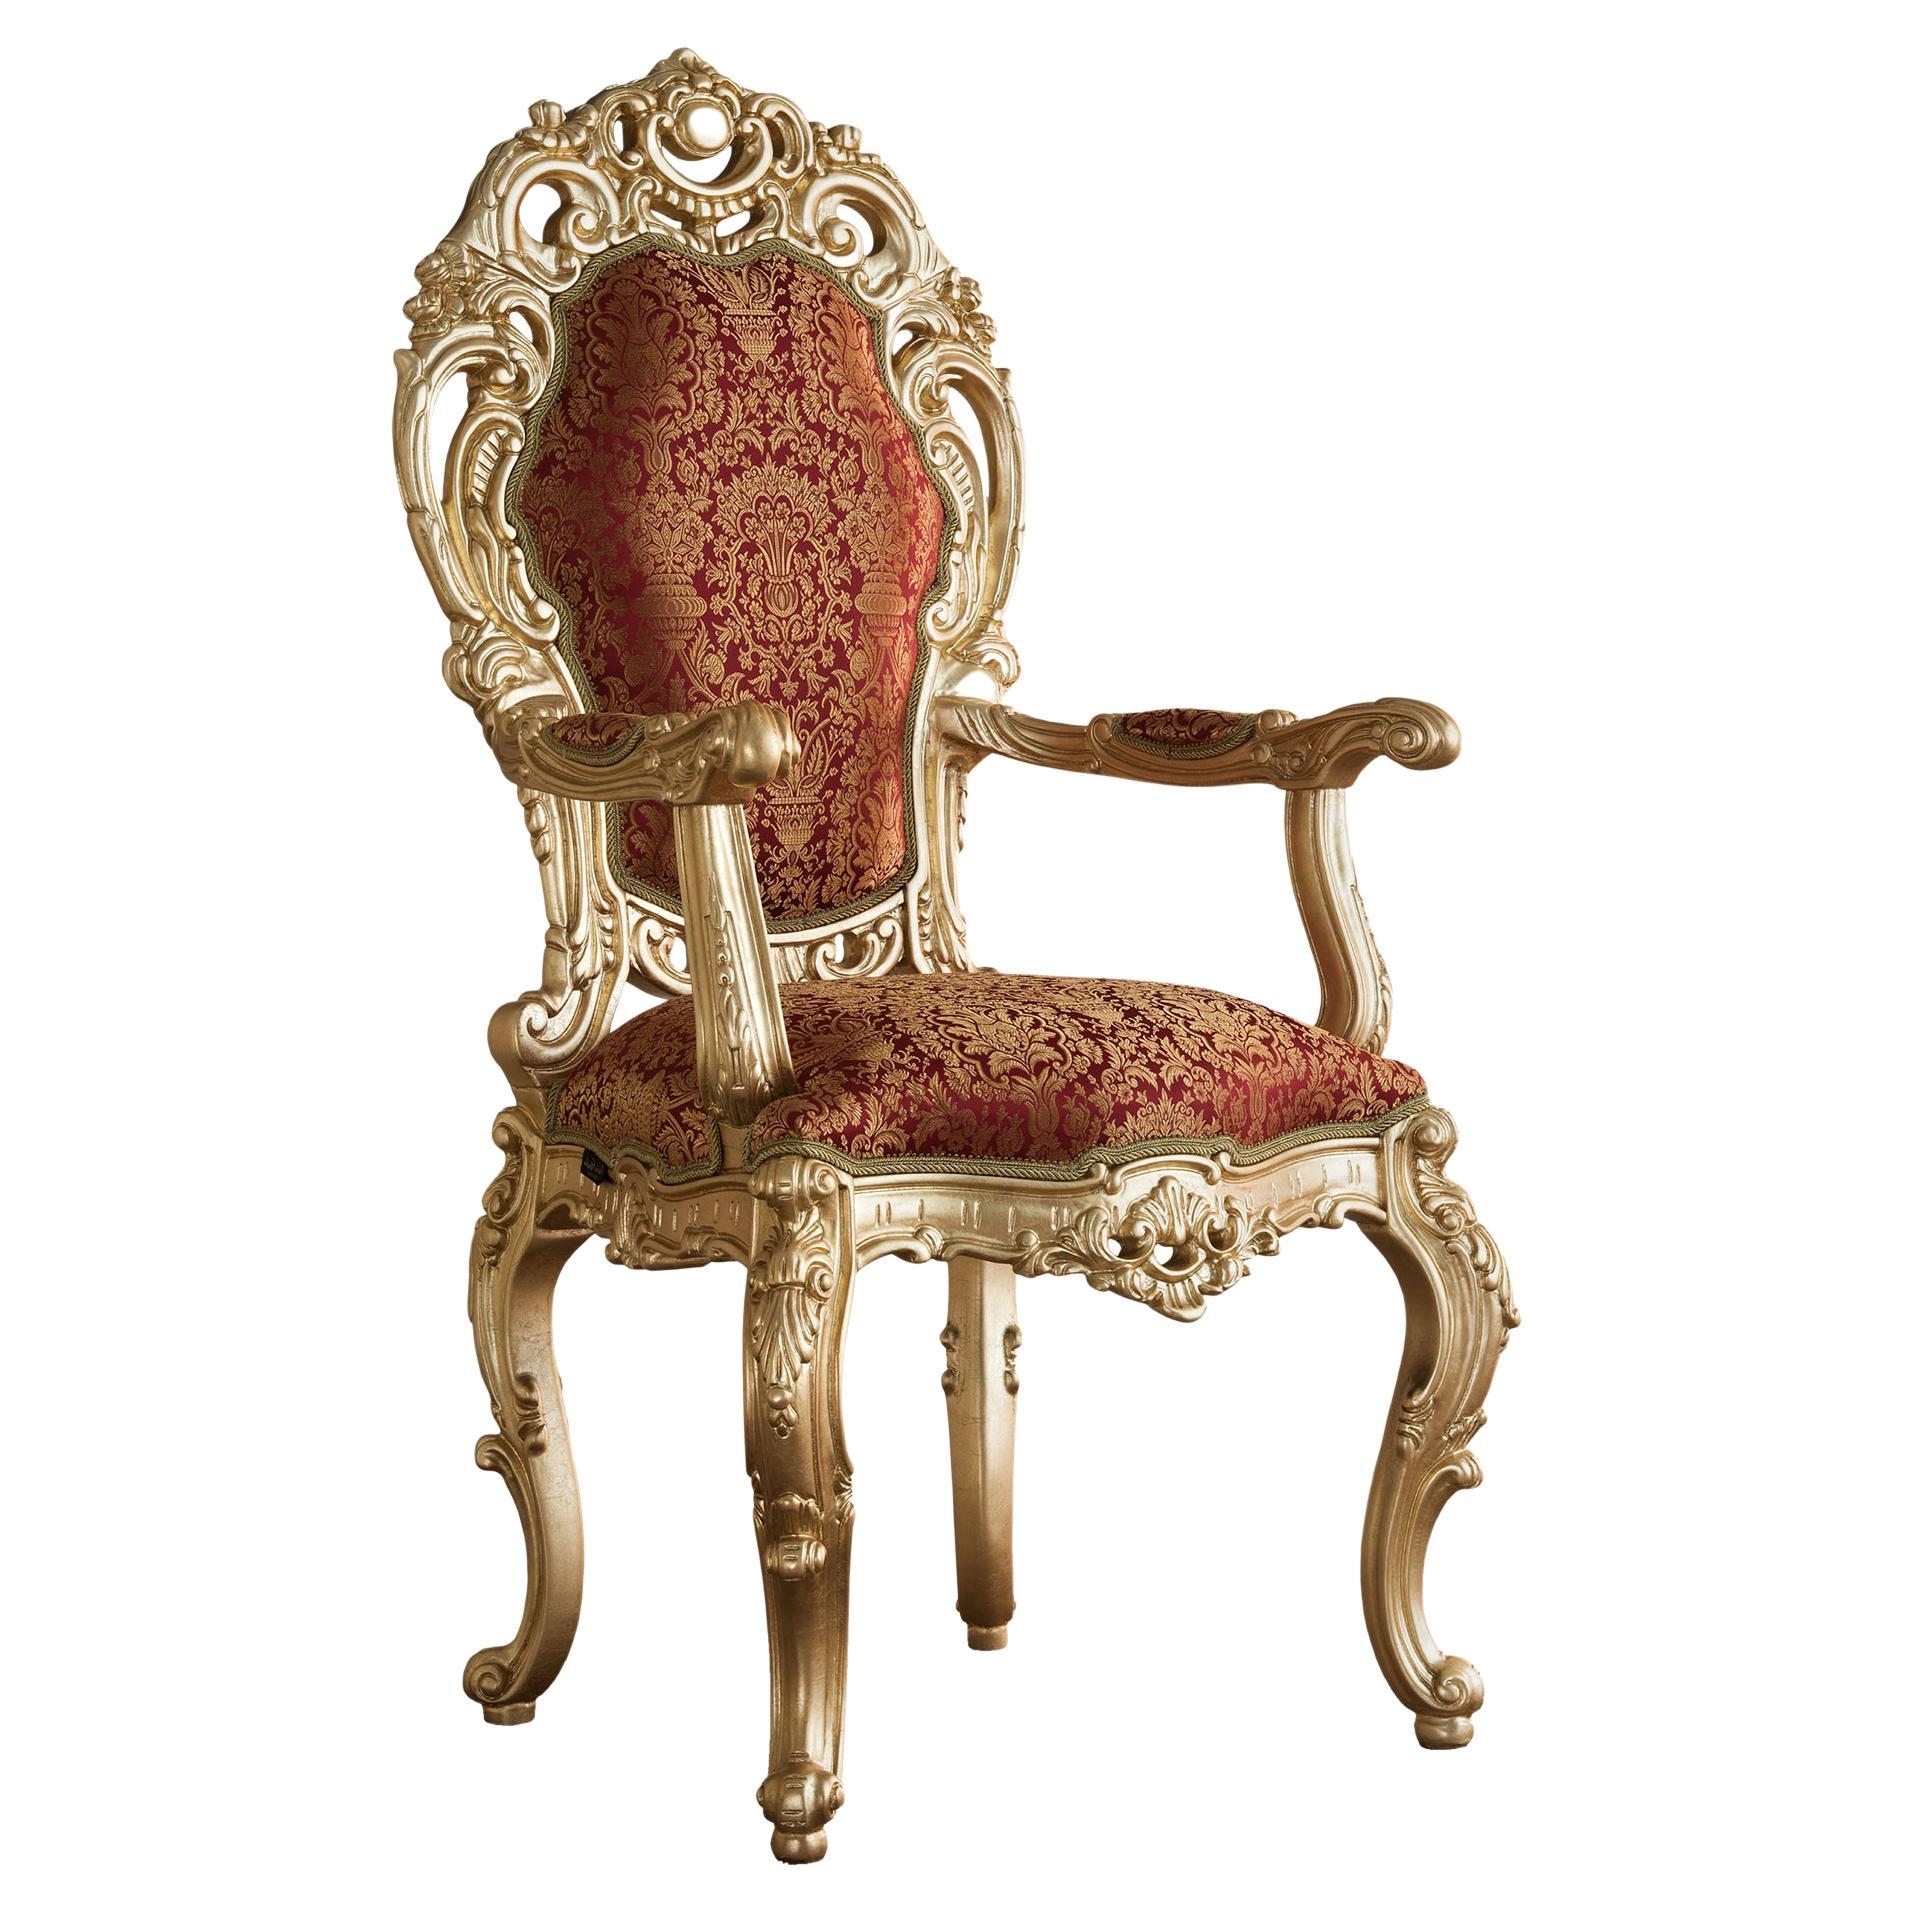 PANTHER #60ST5 CHAIRS FRANCE BAROQUE STYLE DINING ROYAL CHAIR GOLD 